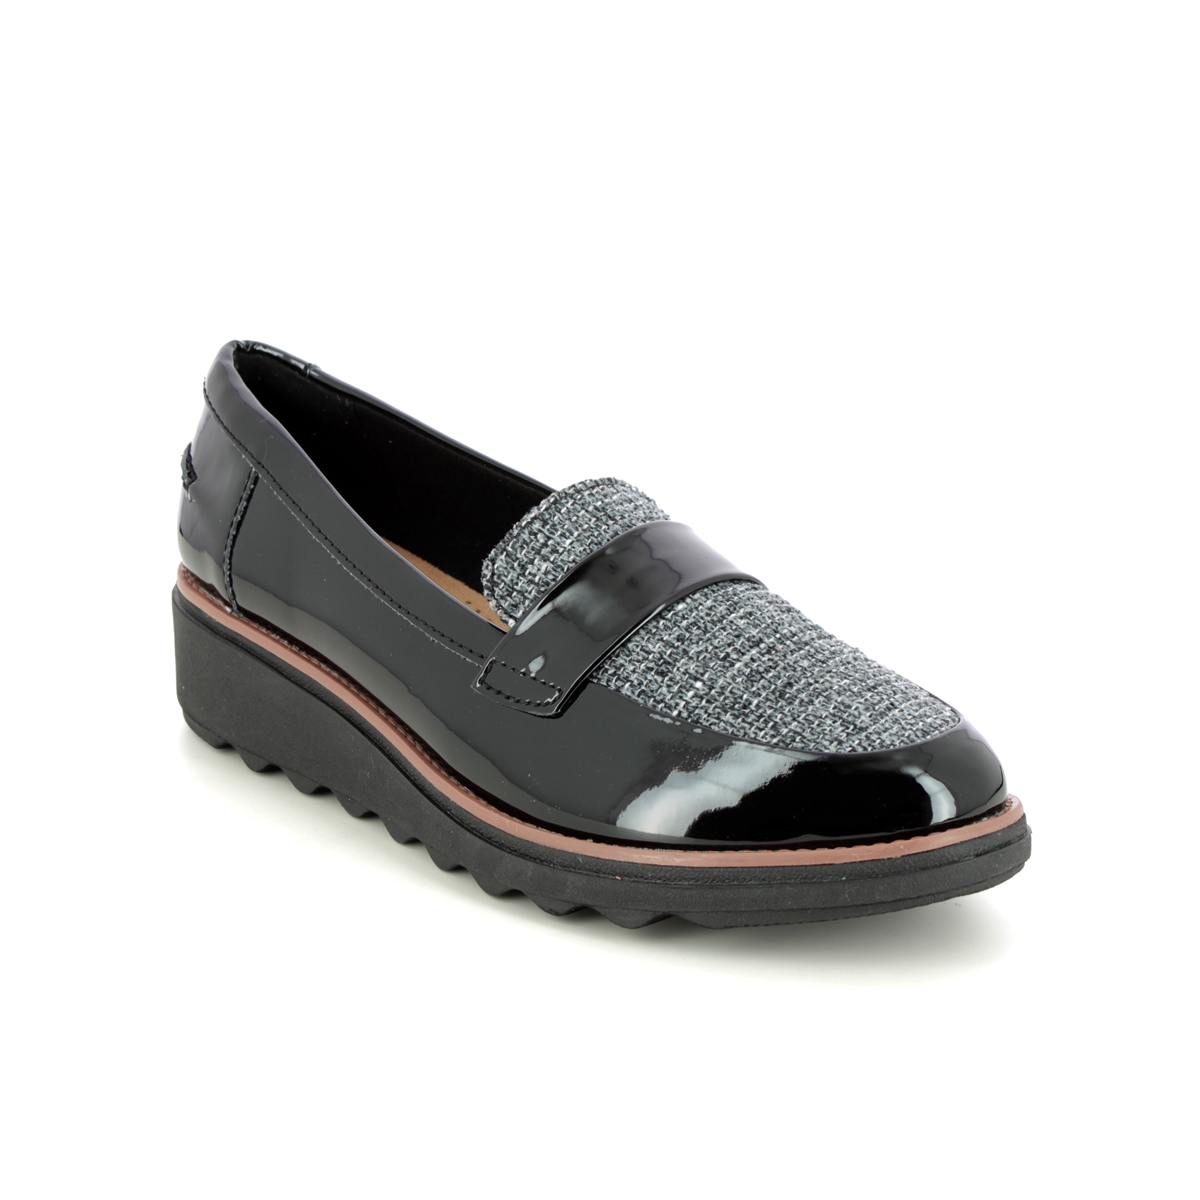 Clarks Sharon Gracie Black Patent Womens Loafers 640824D In Size 4 In Plain Black Patent